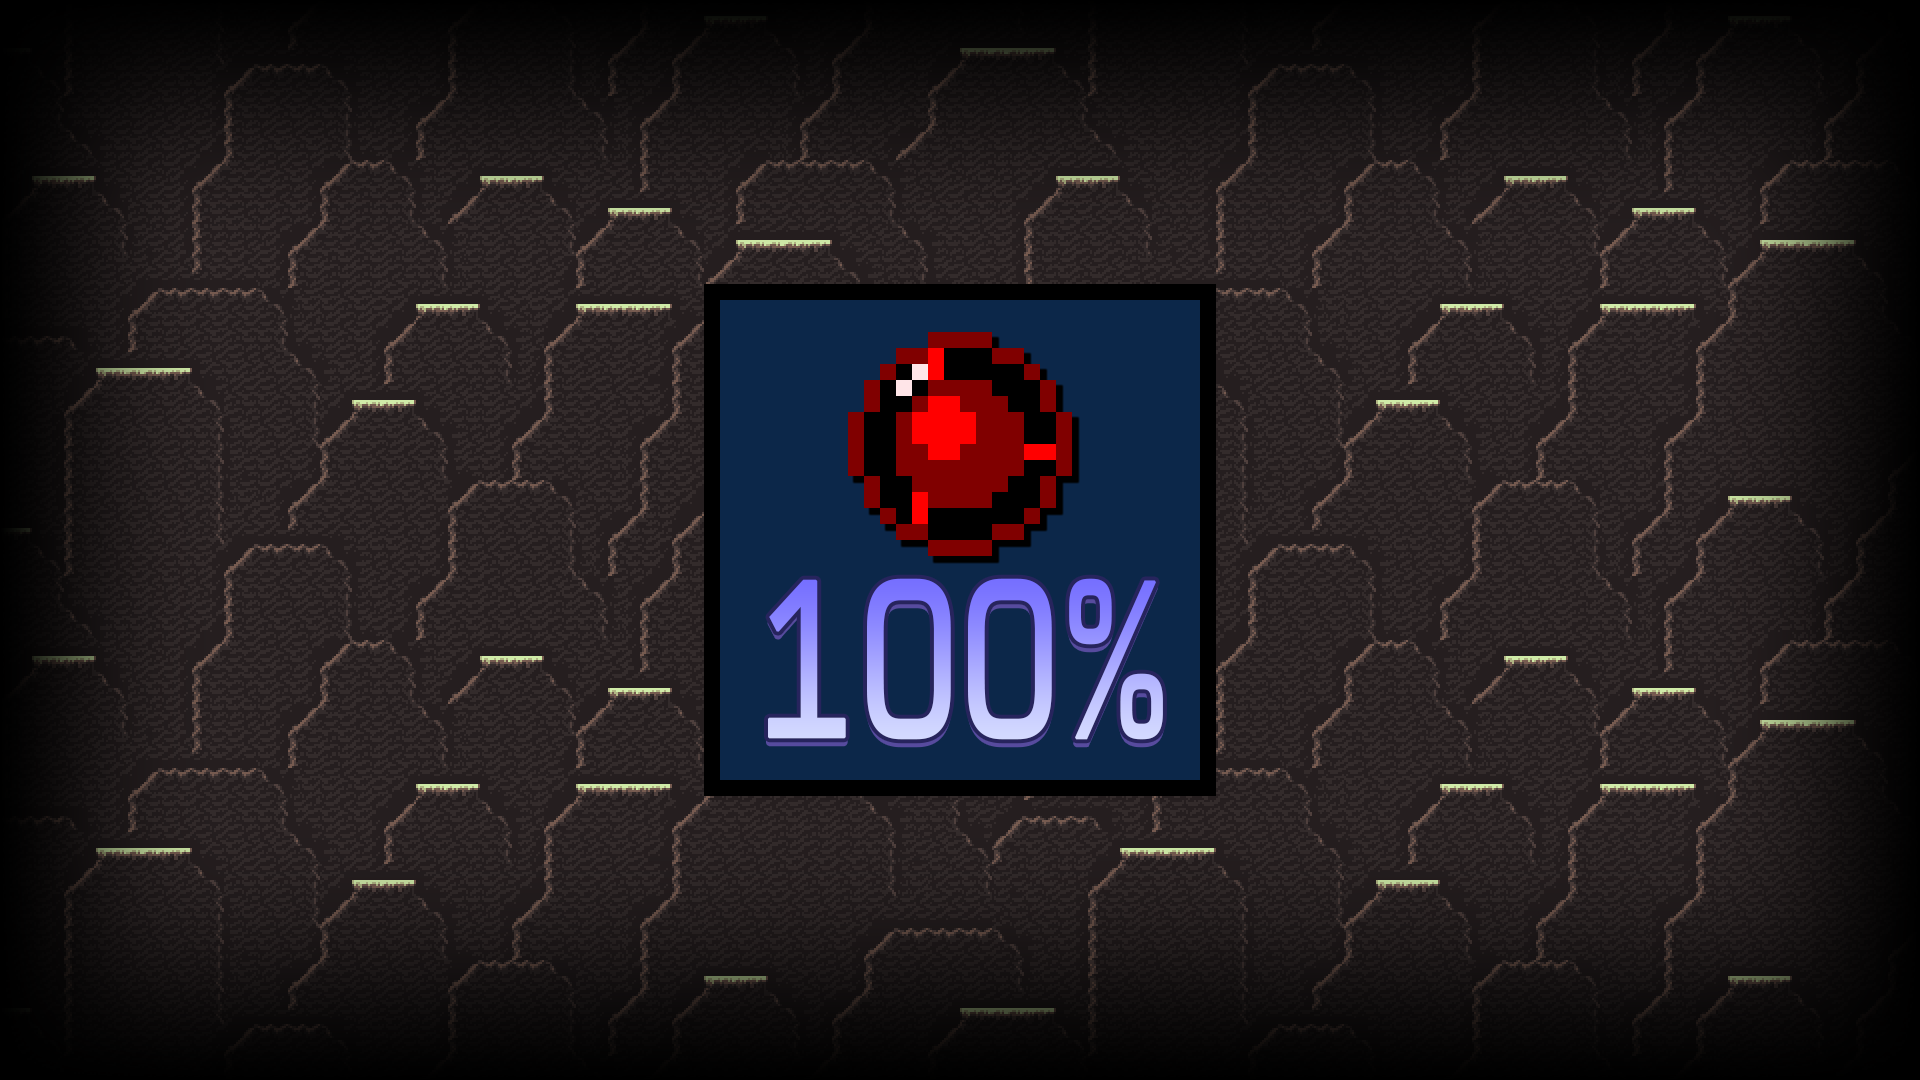 Icon for 100% Health